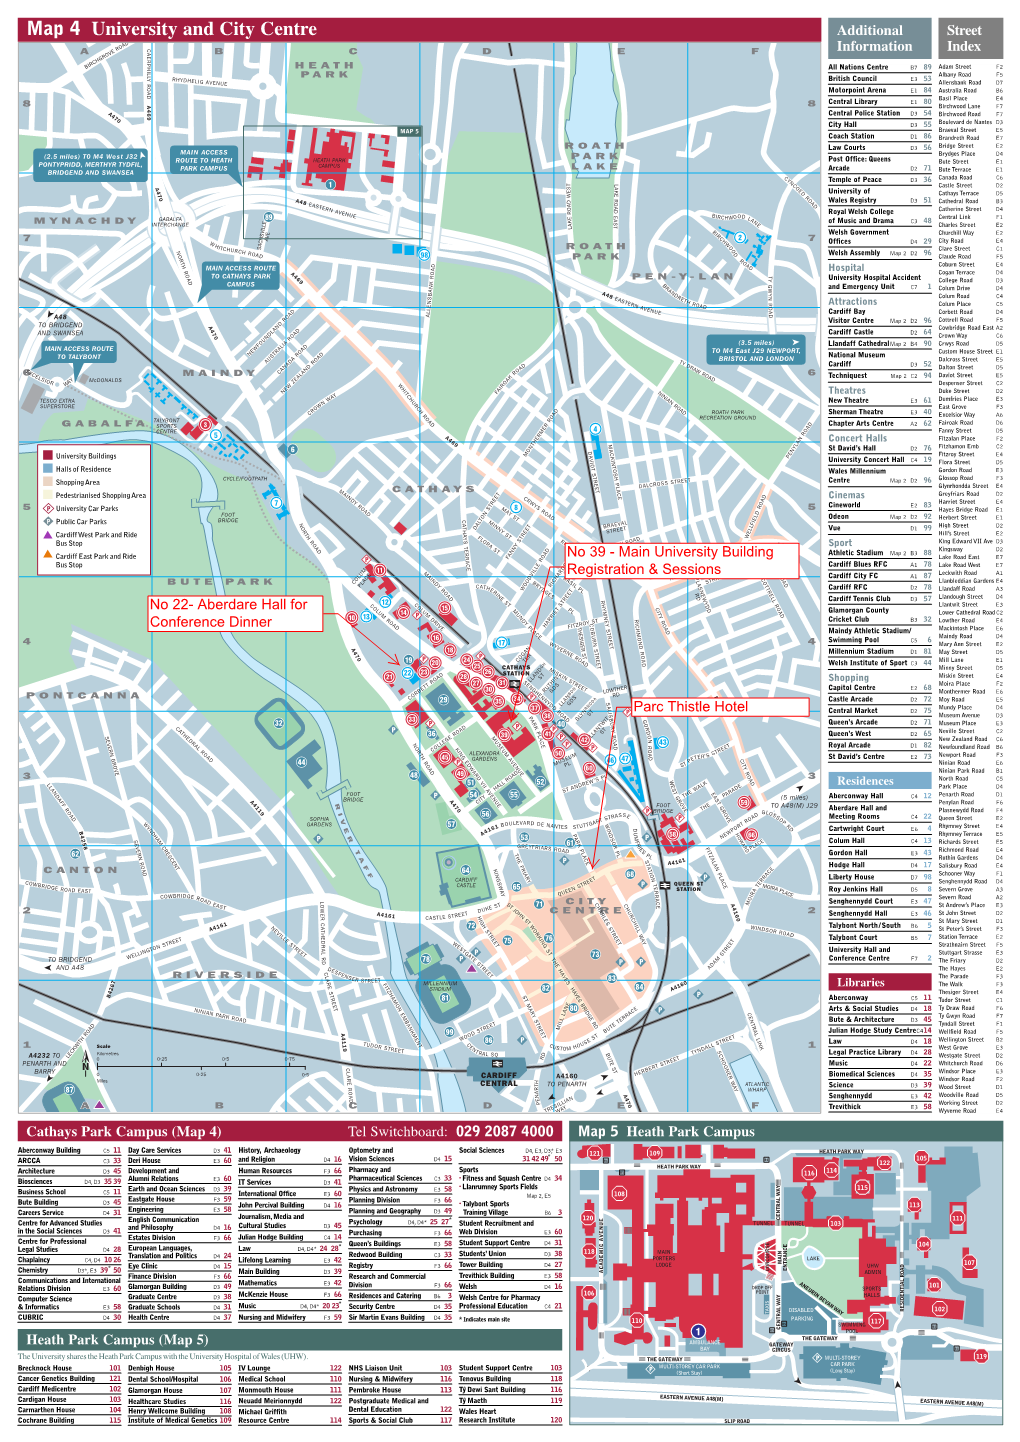 Location Guide for Cardiff University